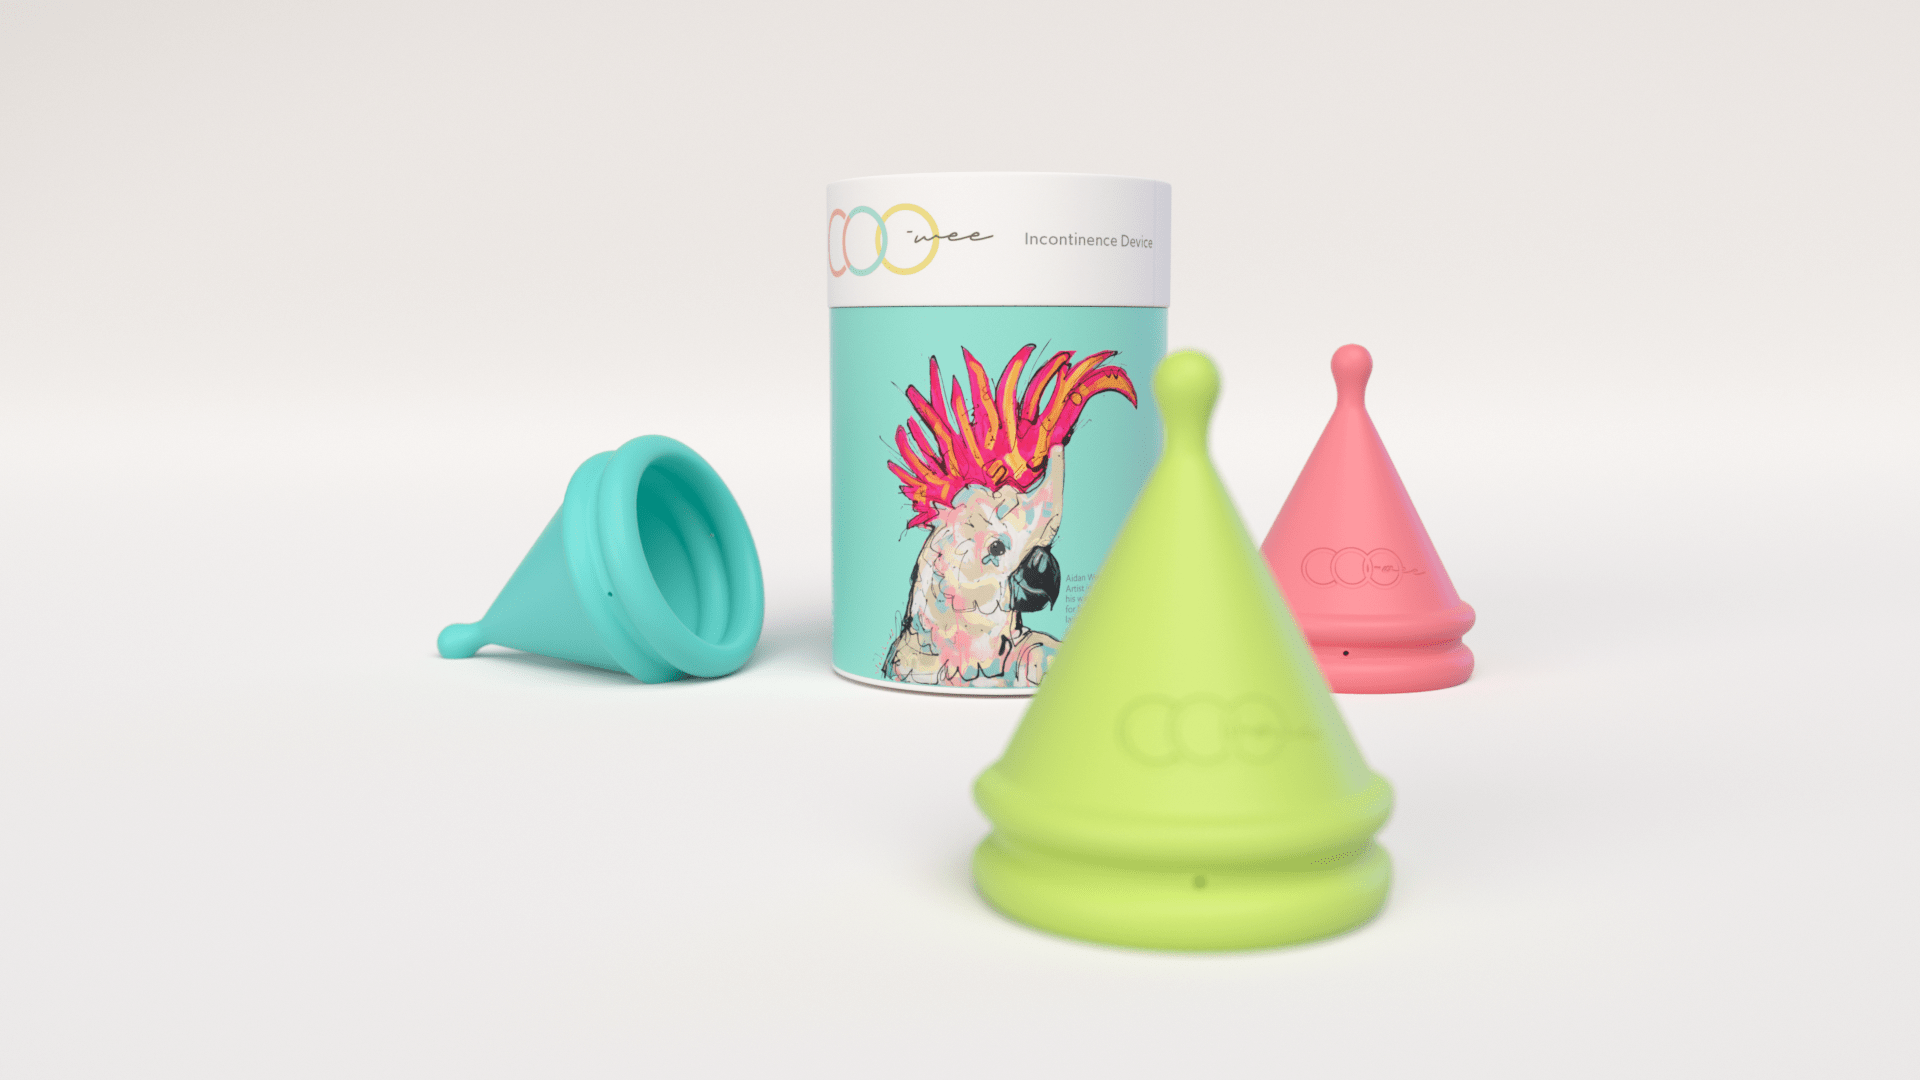 Coo Wee trial pack comes with three different Urinary Incontinence cups, a zip bag and beautiful sustainably-made container